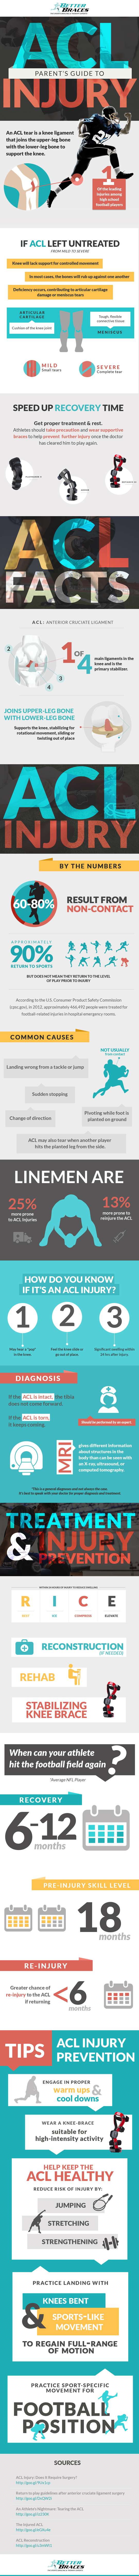 infographic: parents guide to football acl injuries